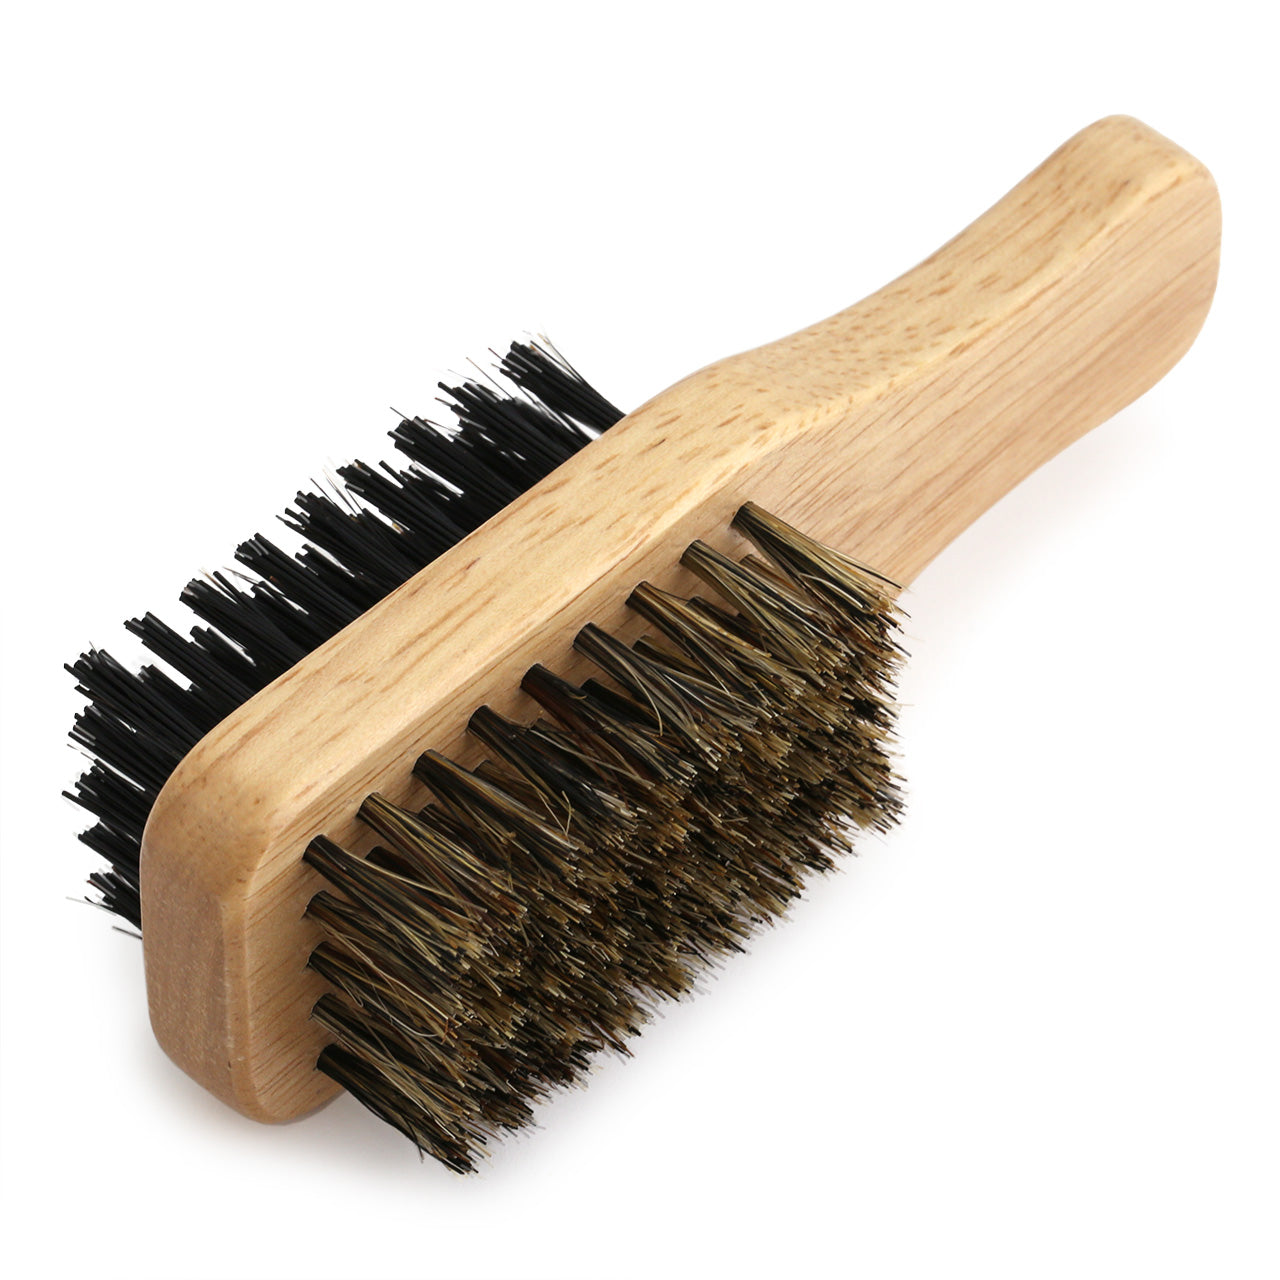 Beard Brush Small, two sided with wooden paddle handle - side view